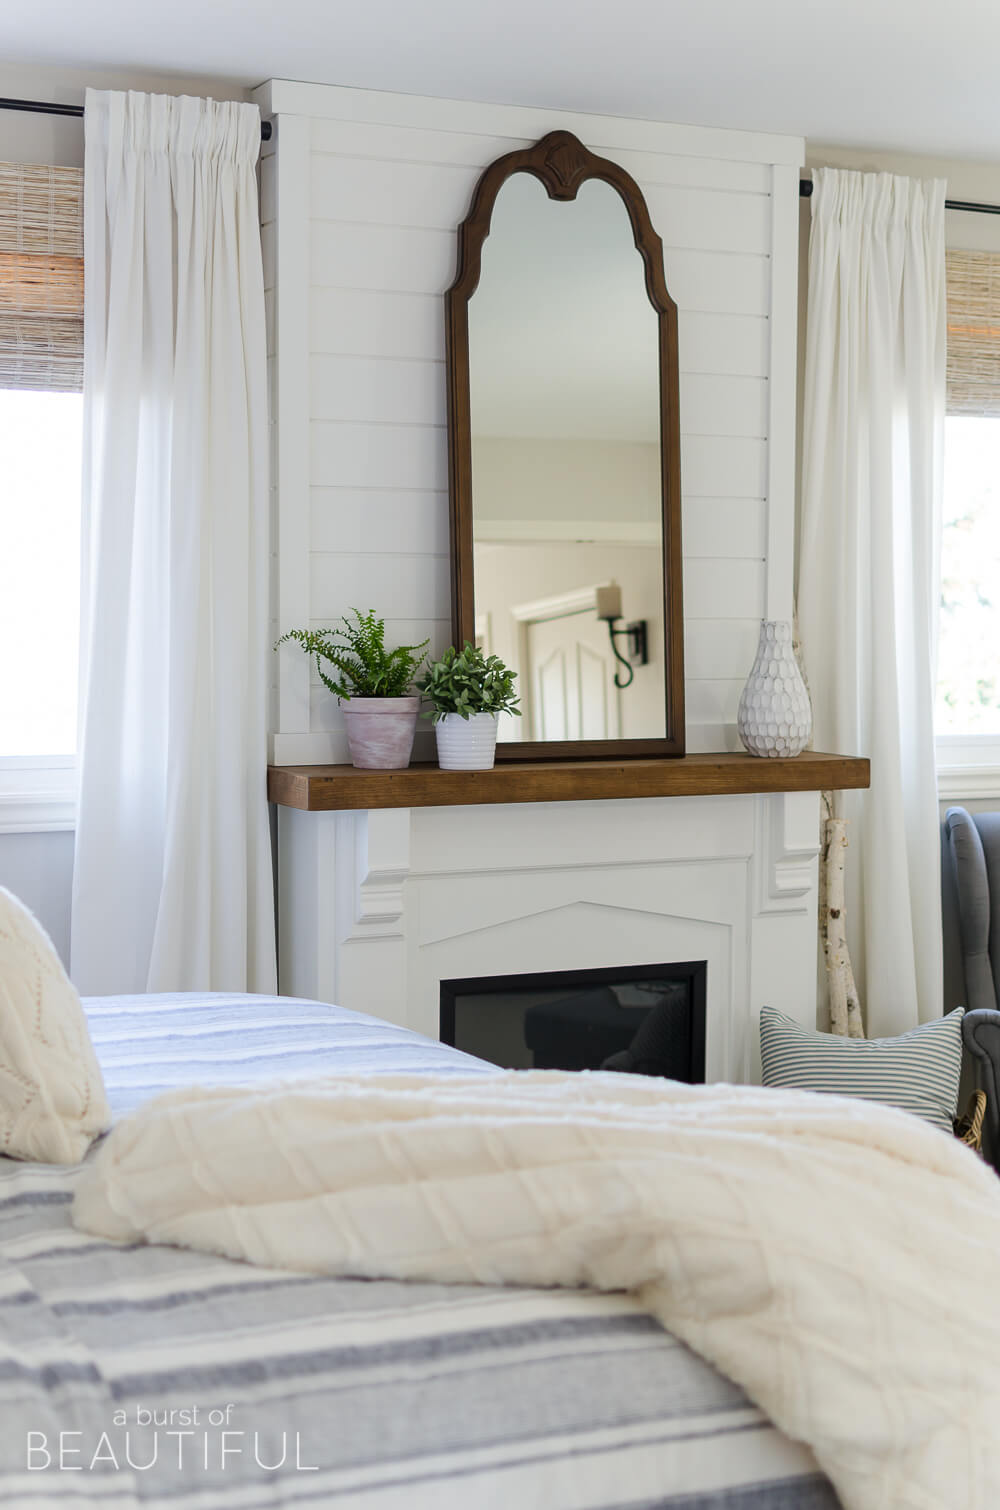 Antique Dark Wood and Breezy White Linens